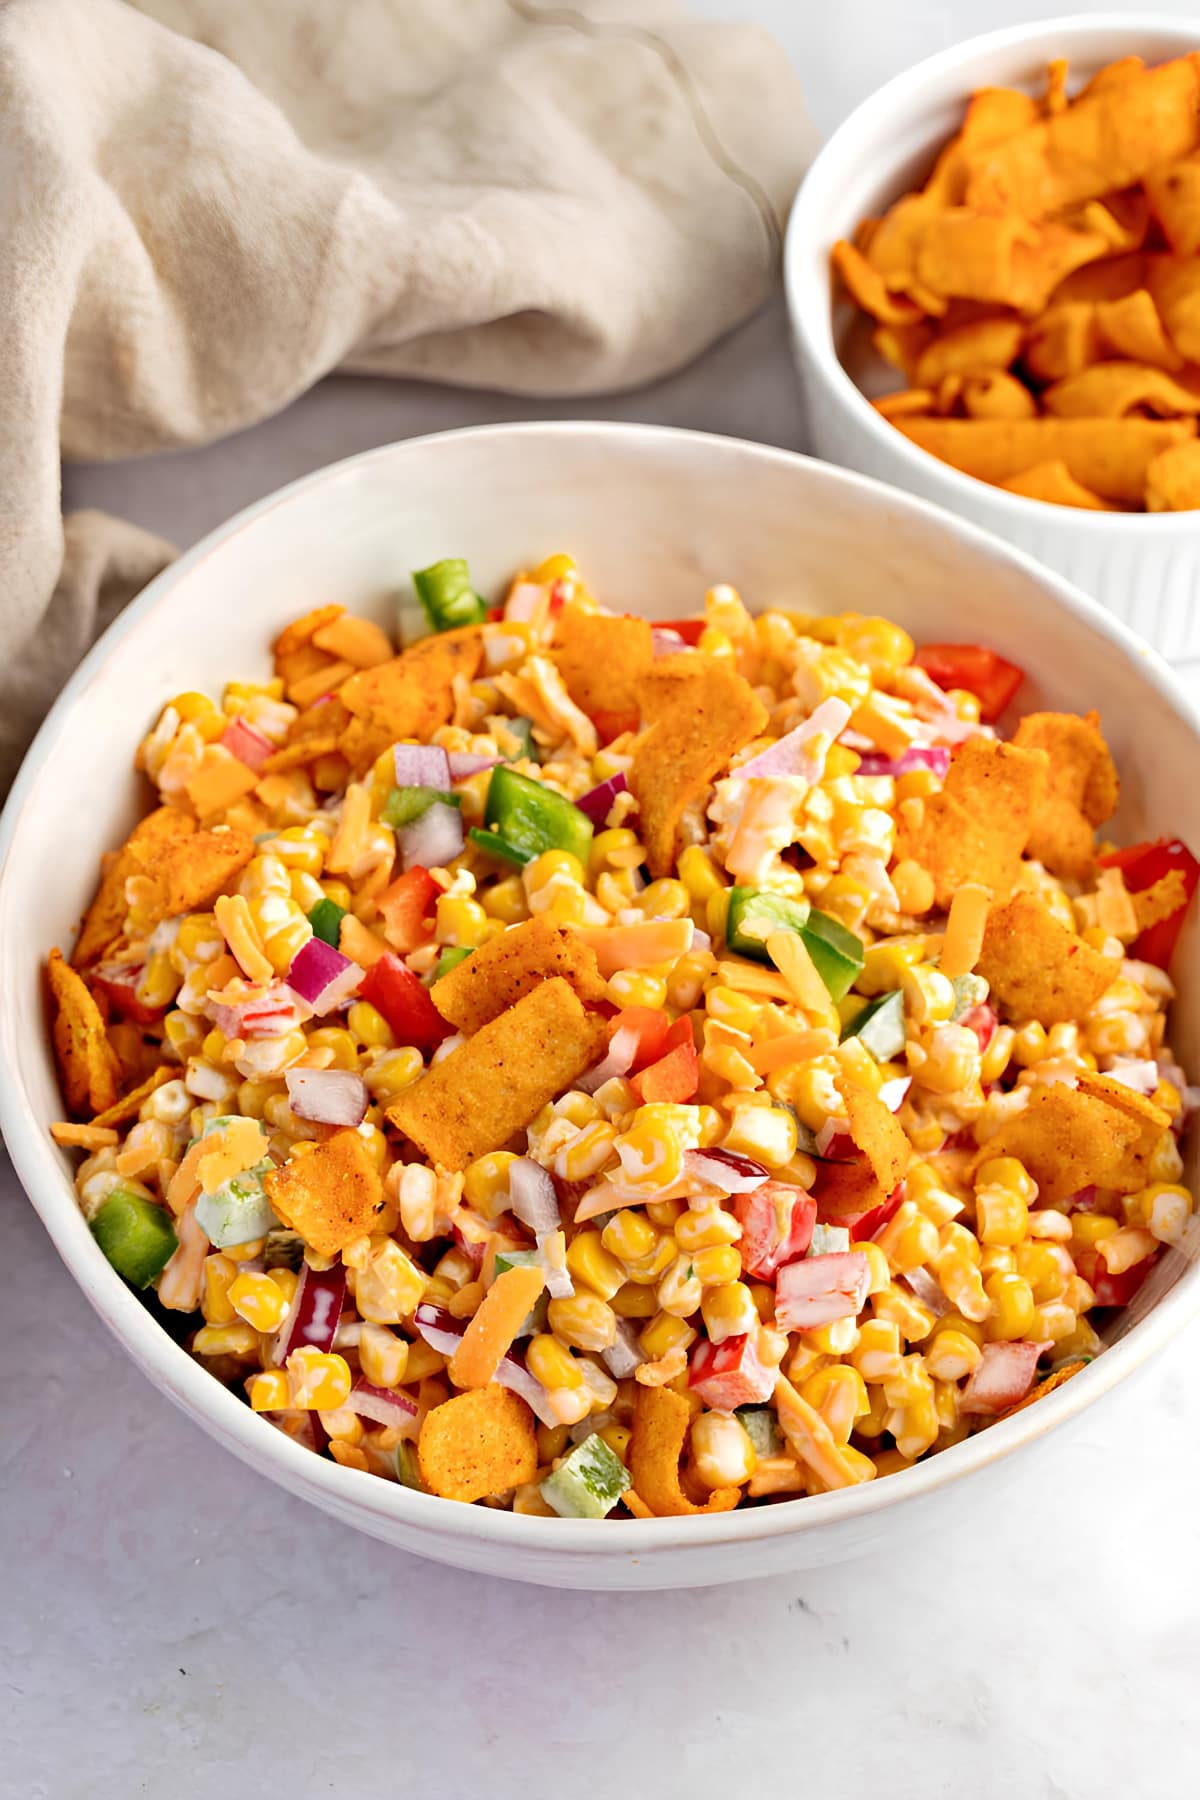 Bowl of Creamy Frito Corn Salad with Peppers and Onions